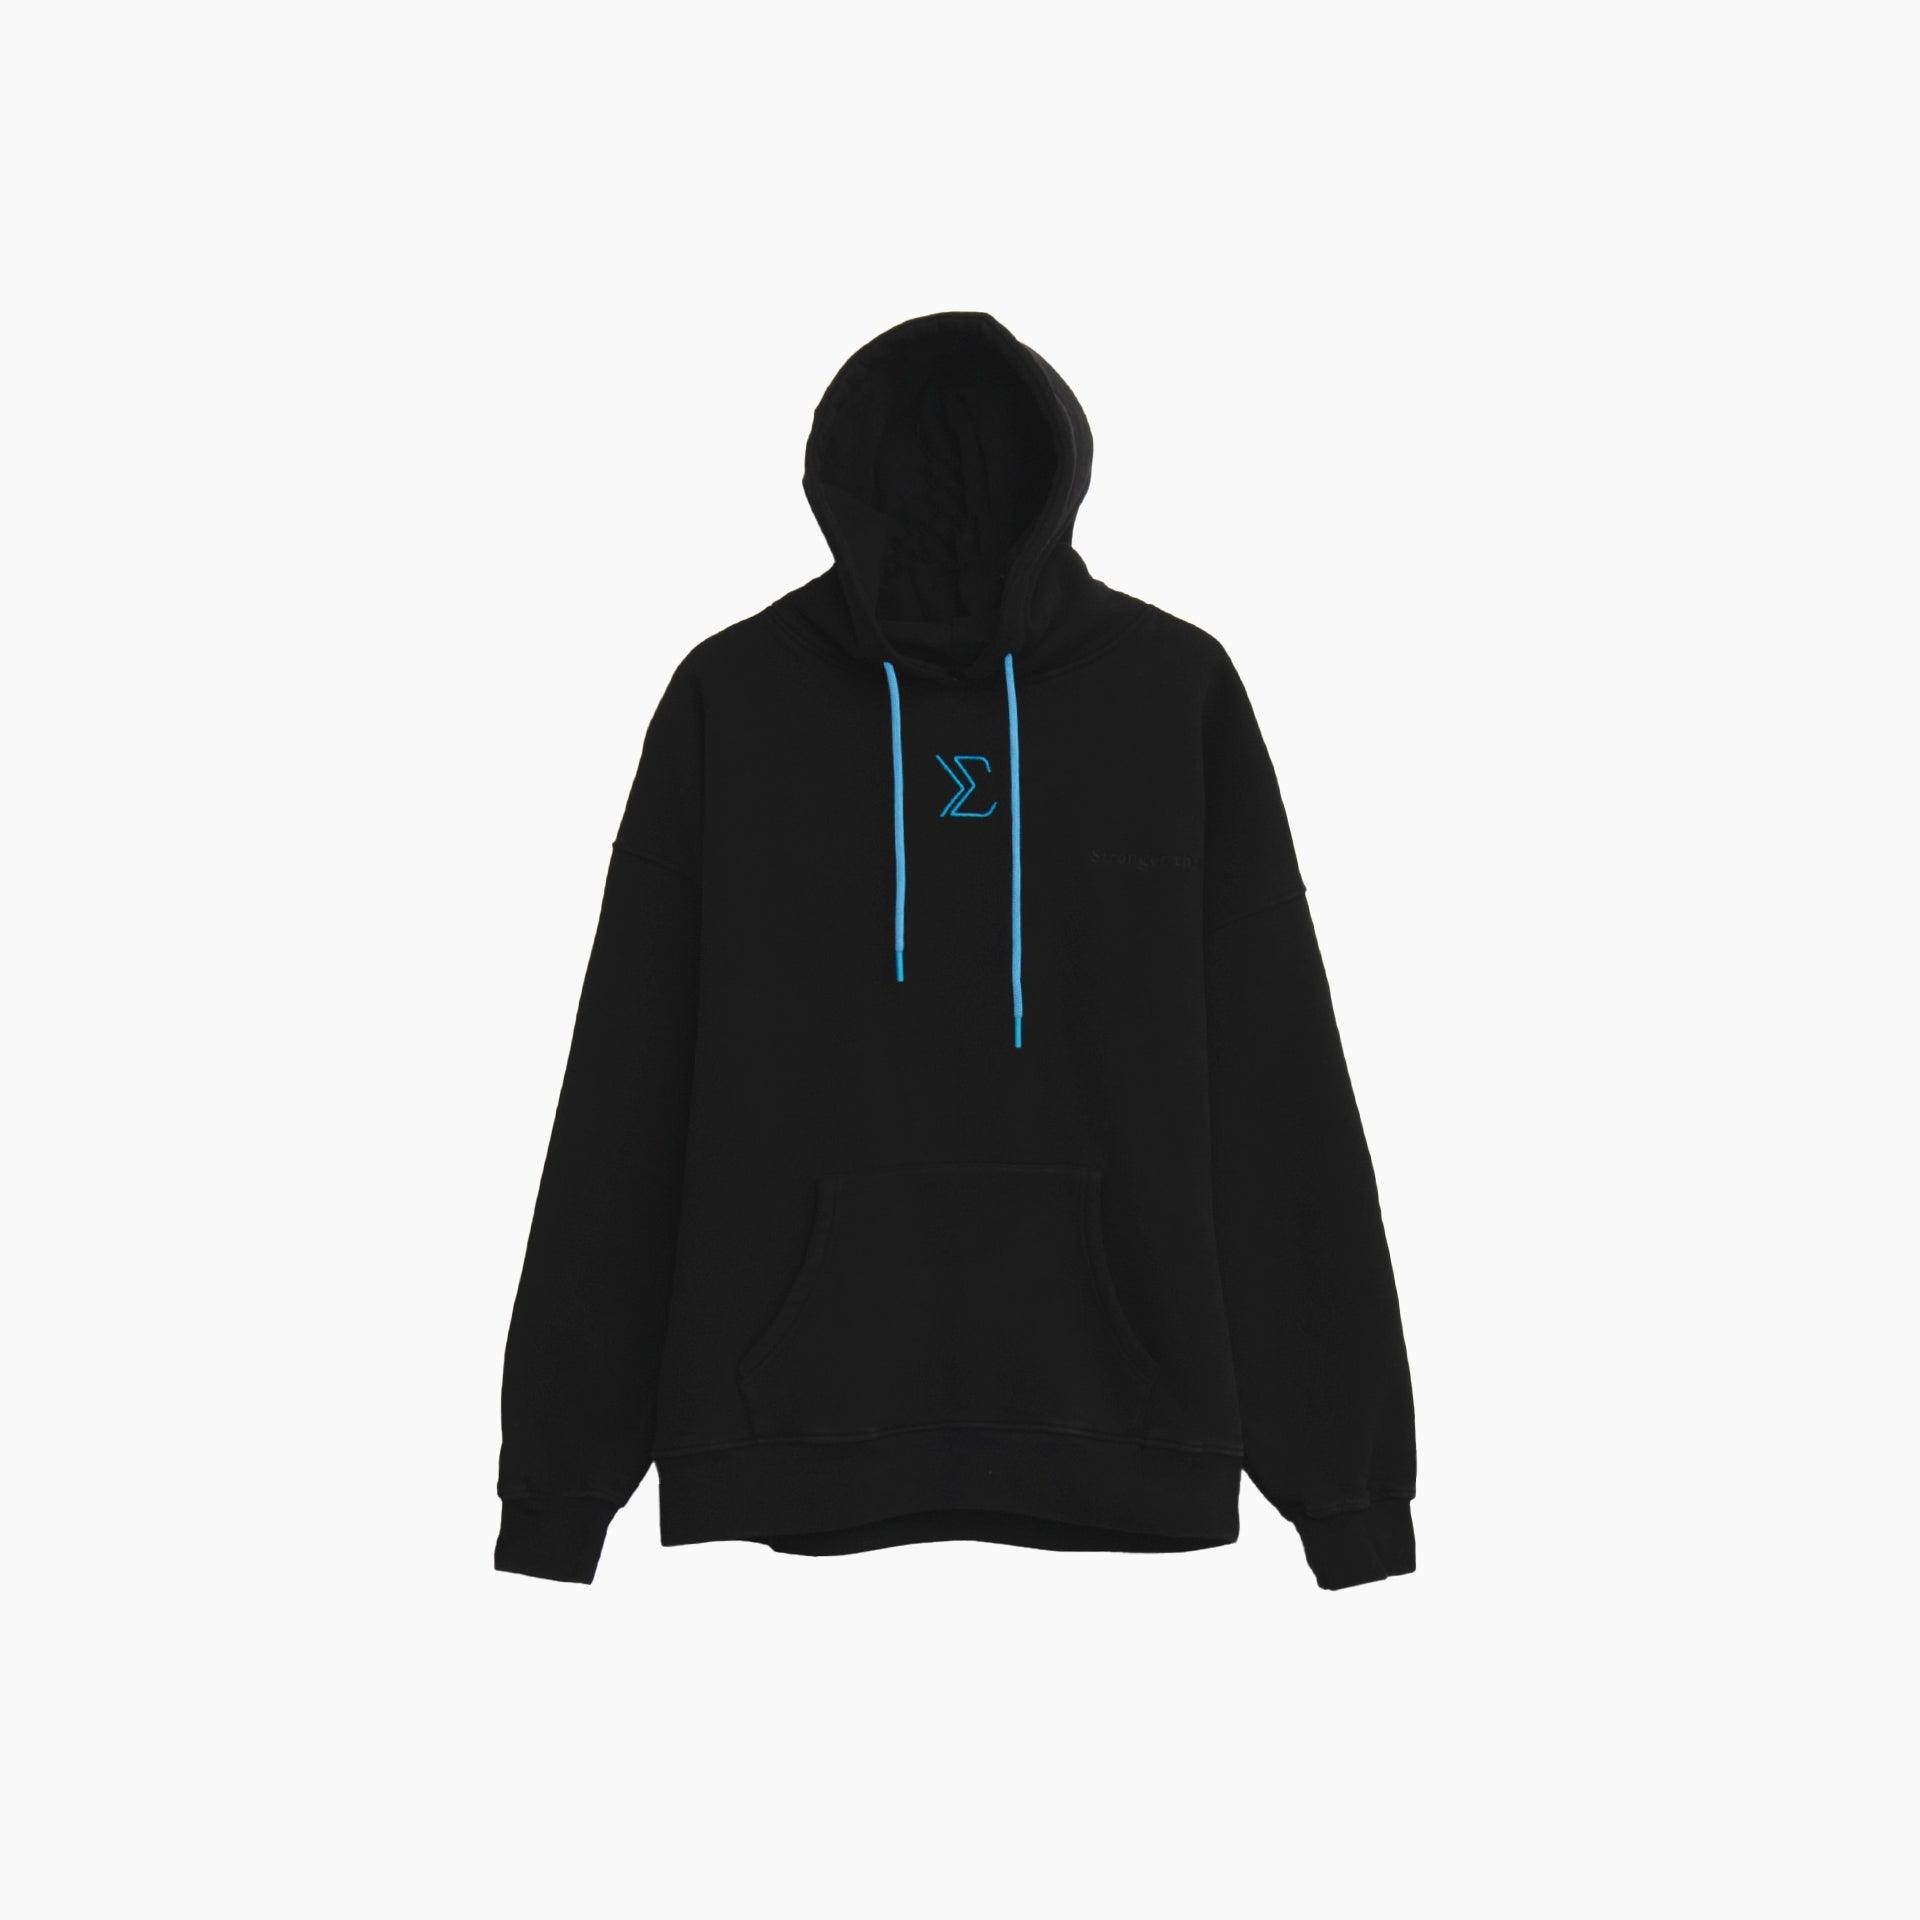 Black Hoodie with washed fabric and Blue Logo from Sigma - WECRE8